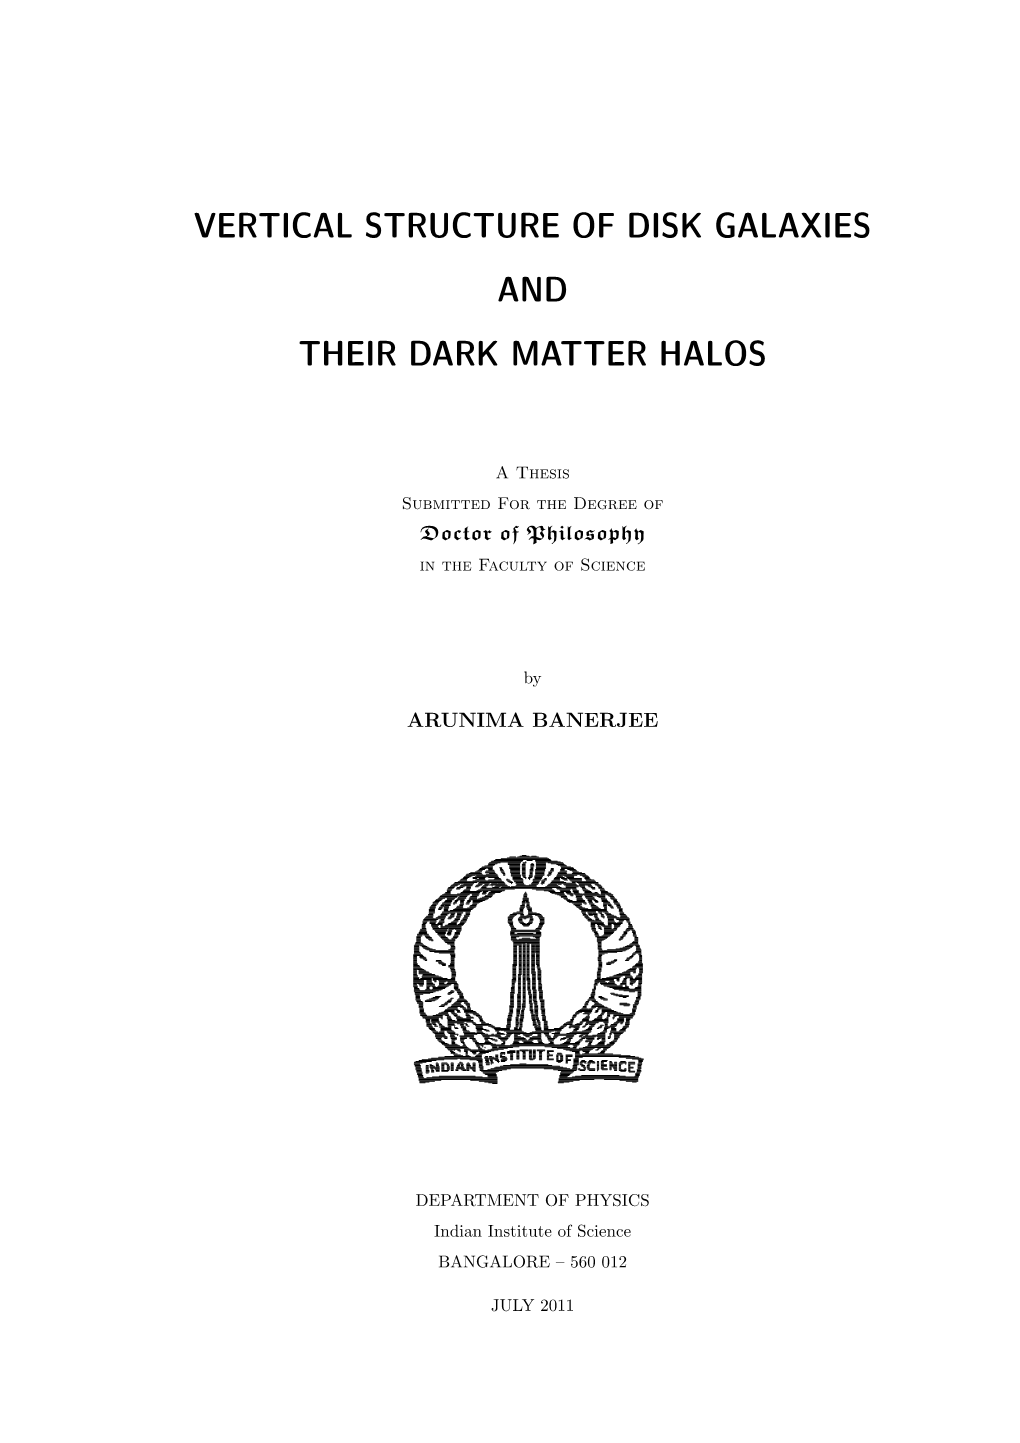 Vertical Structure of Disk Galaxies and Their Dark Matter Halos